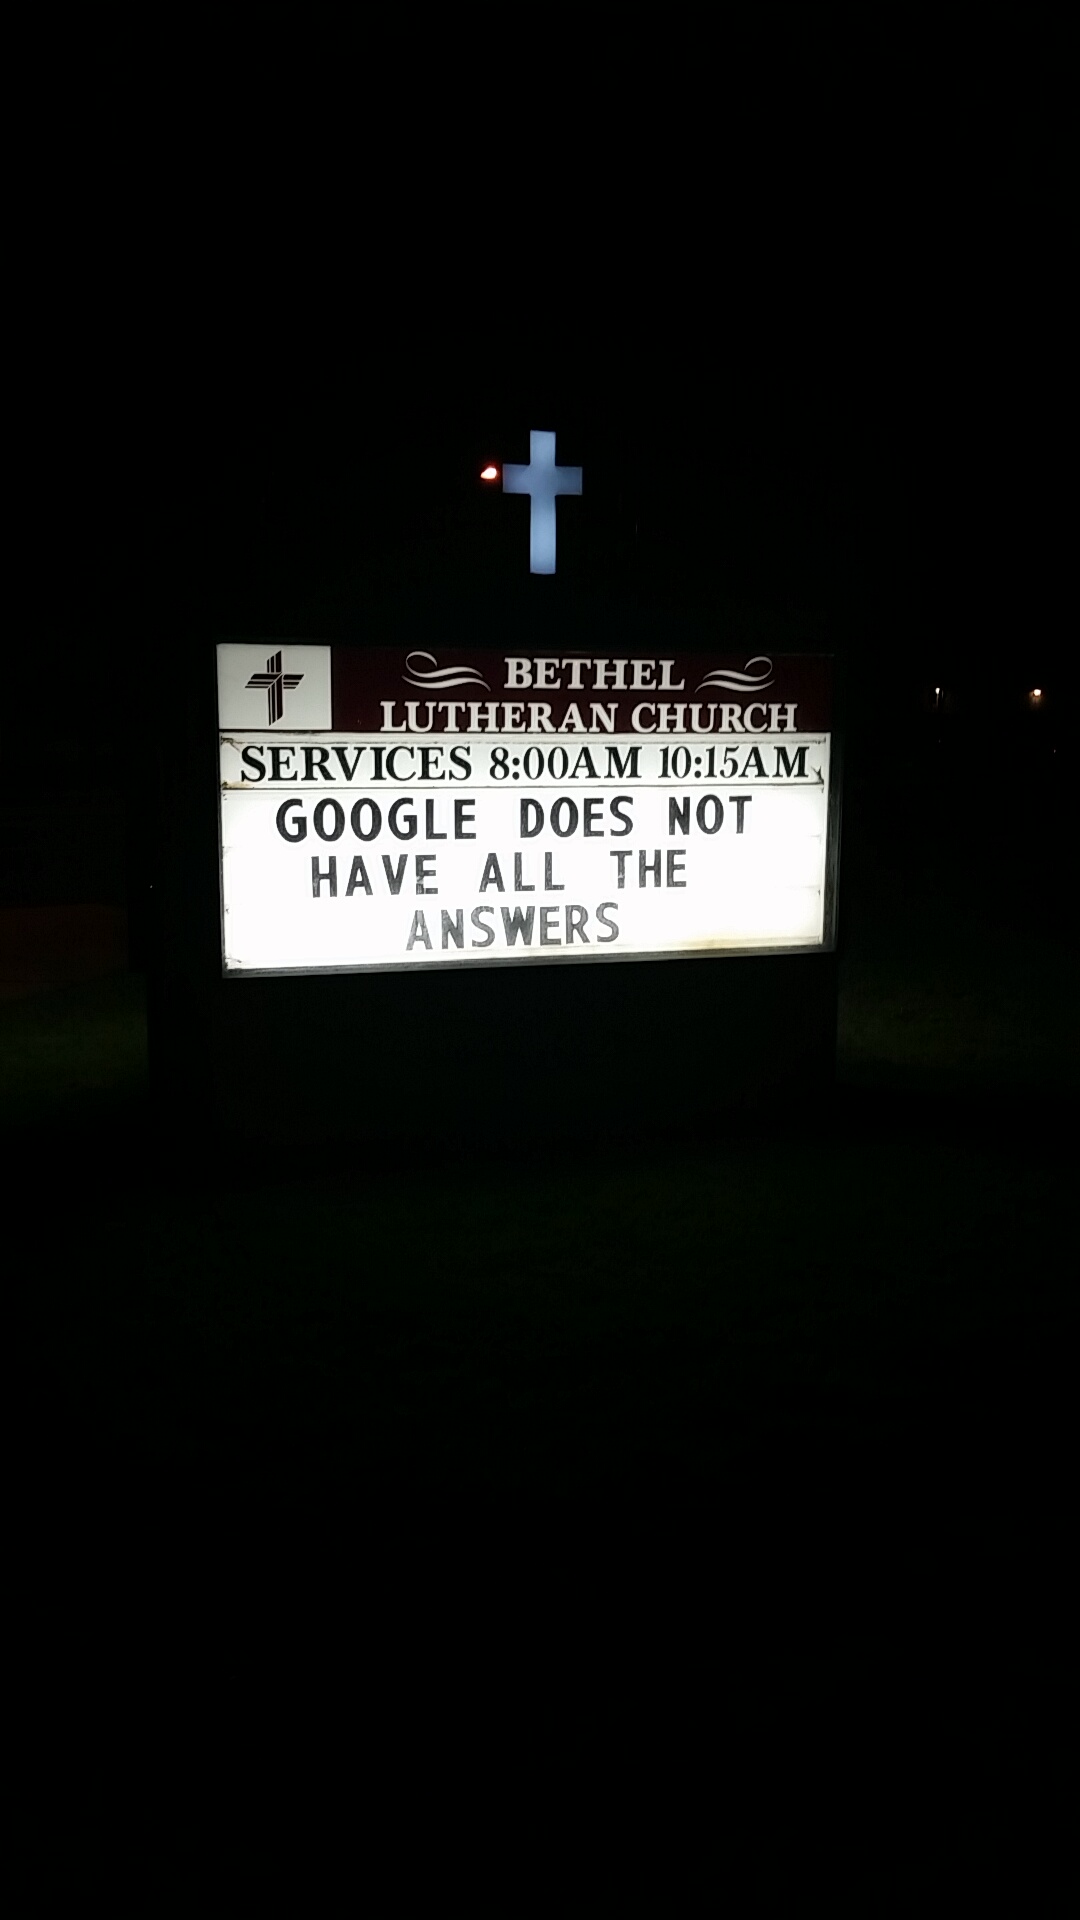 This church got some balls challenging Google like that